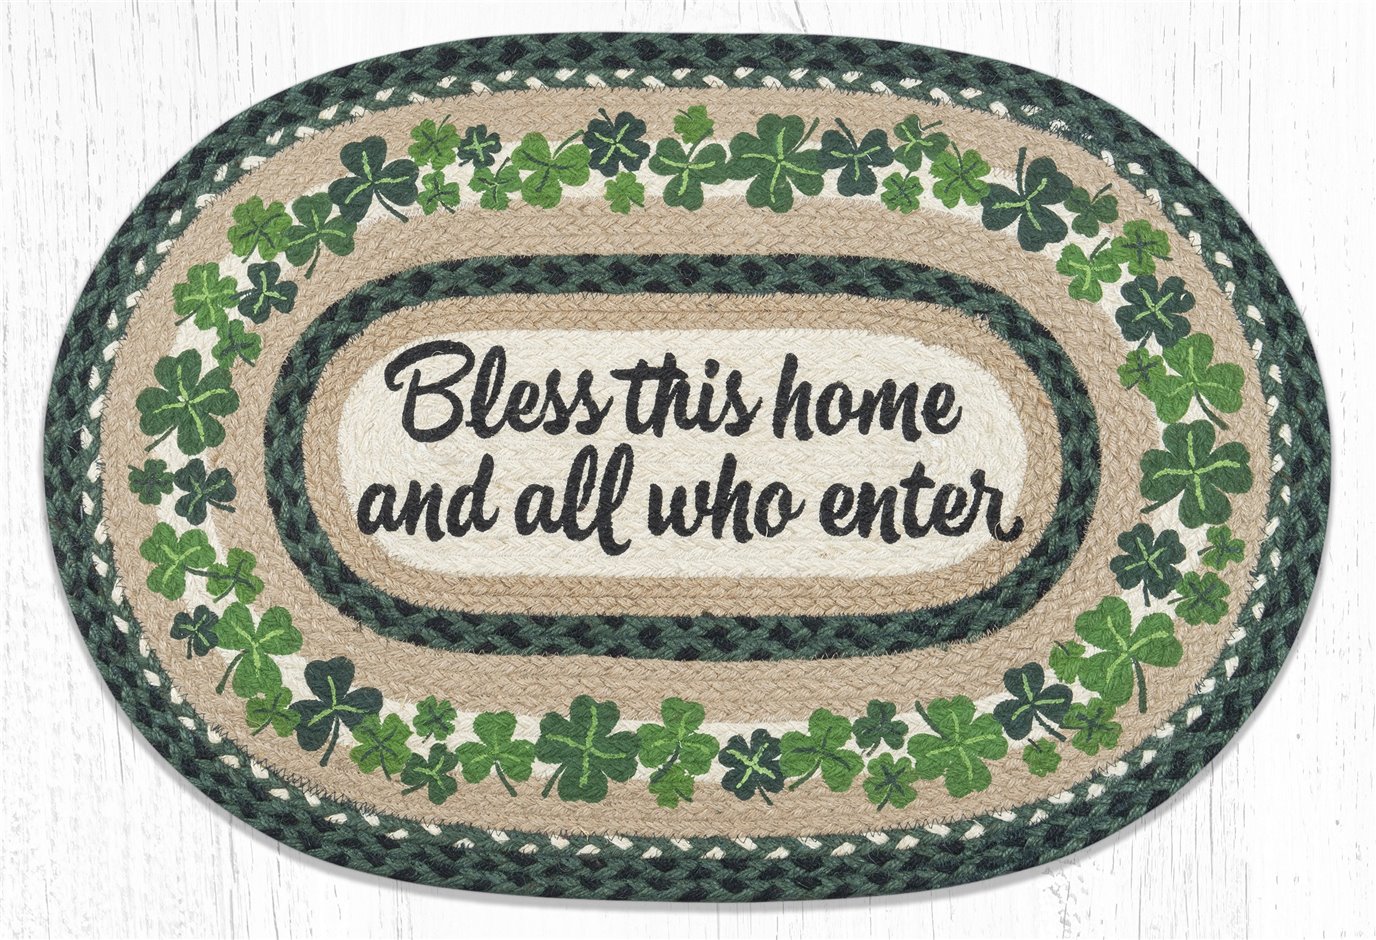 Bless This Home Oval Braided Rug 20"x30"